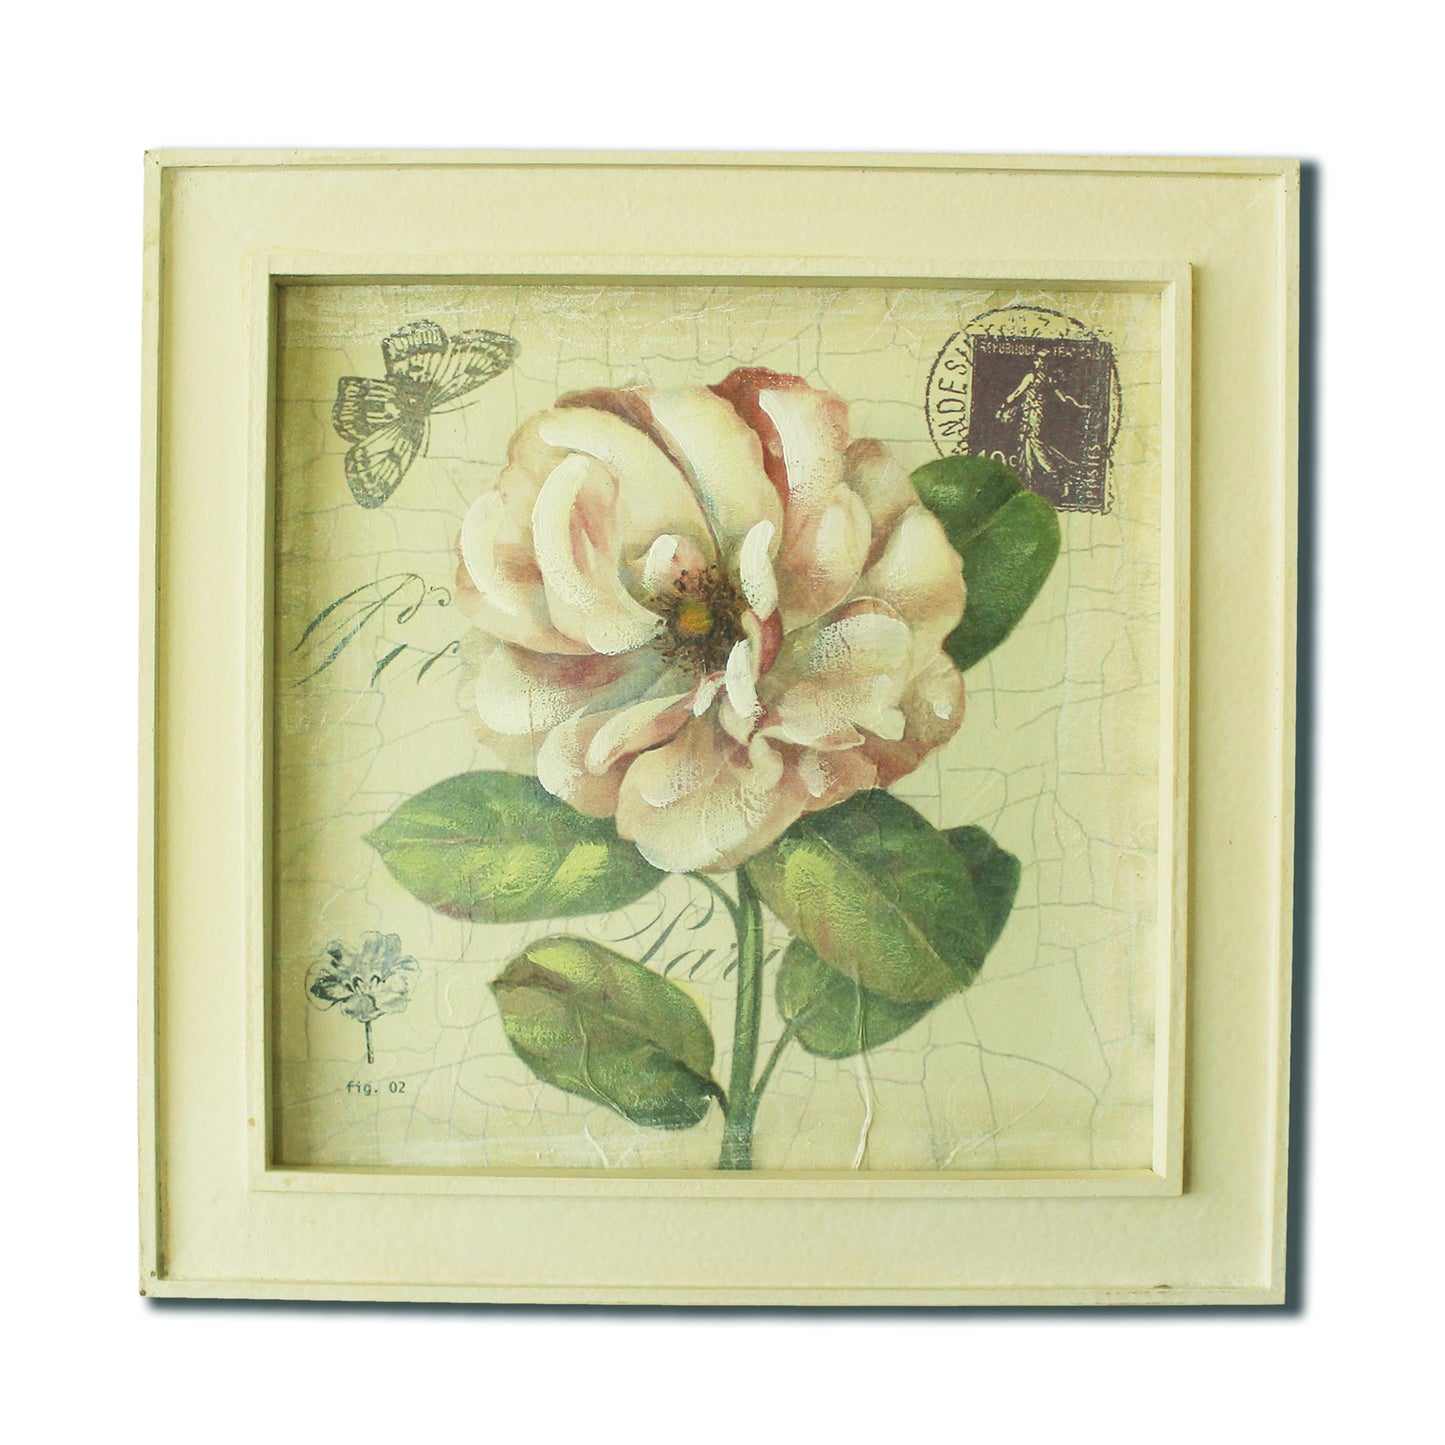 CVHOMEDECO. Rustic Vintage Hand Painted Wood Frame Wall Hanging 3D Painting Decoration Art, Rose Flower Design, 14.25 x 14.25 Inch